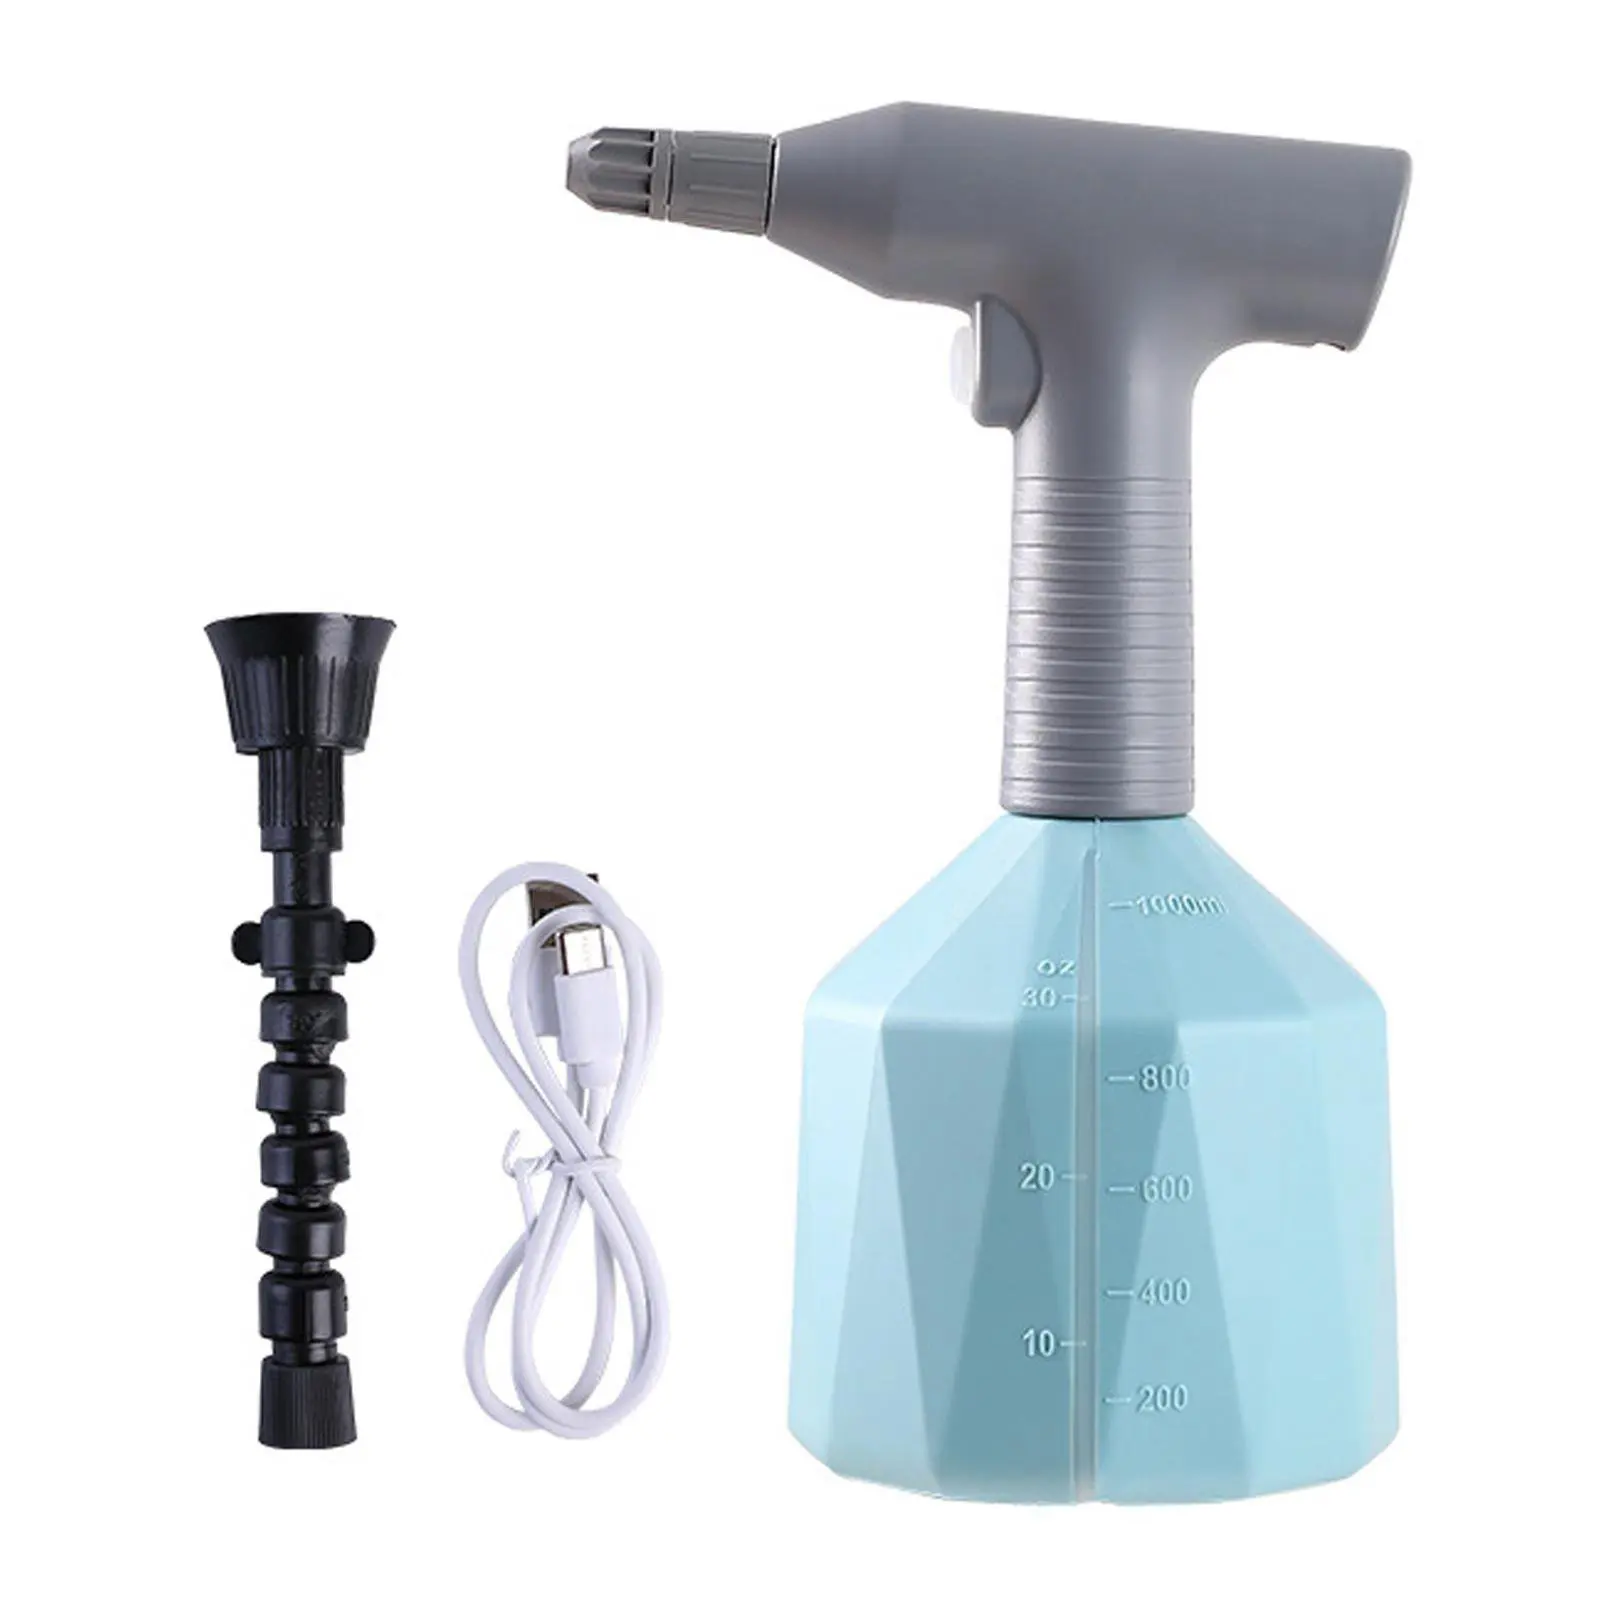 1000ml Portable Battery Power Operated Water Spraying Fine Nano Mist 1L Rechargeable Electric Garden Pump Sprayer